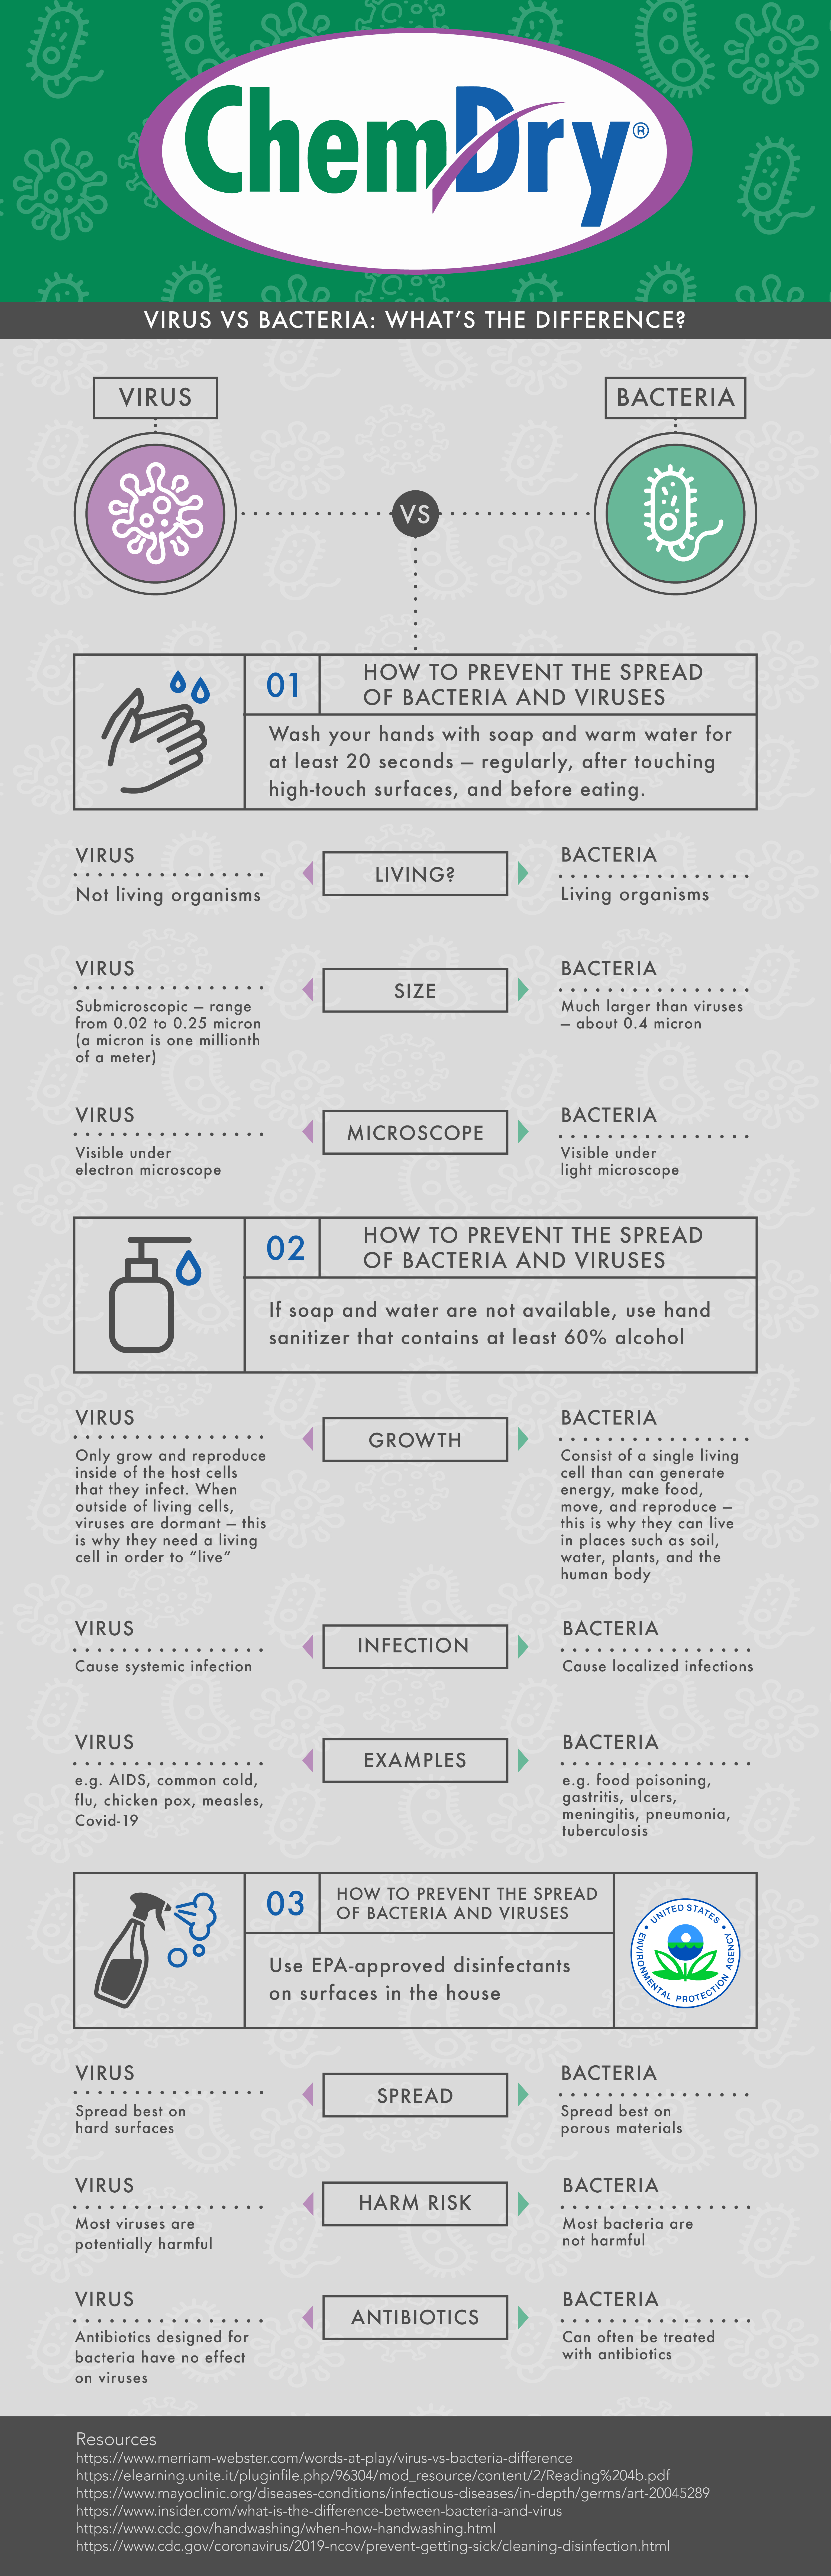 What's the Difference Between Viruses and Bacteria Infographic by Chem-Dry